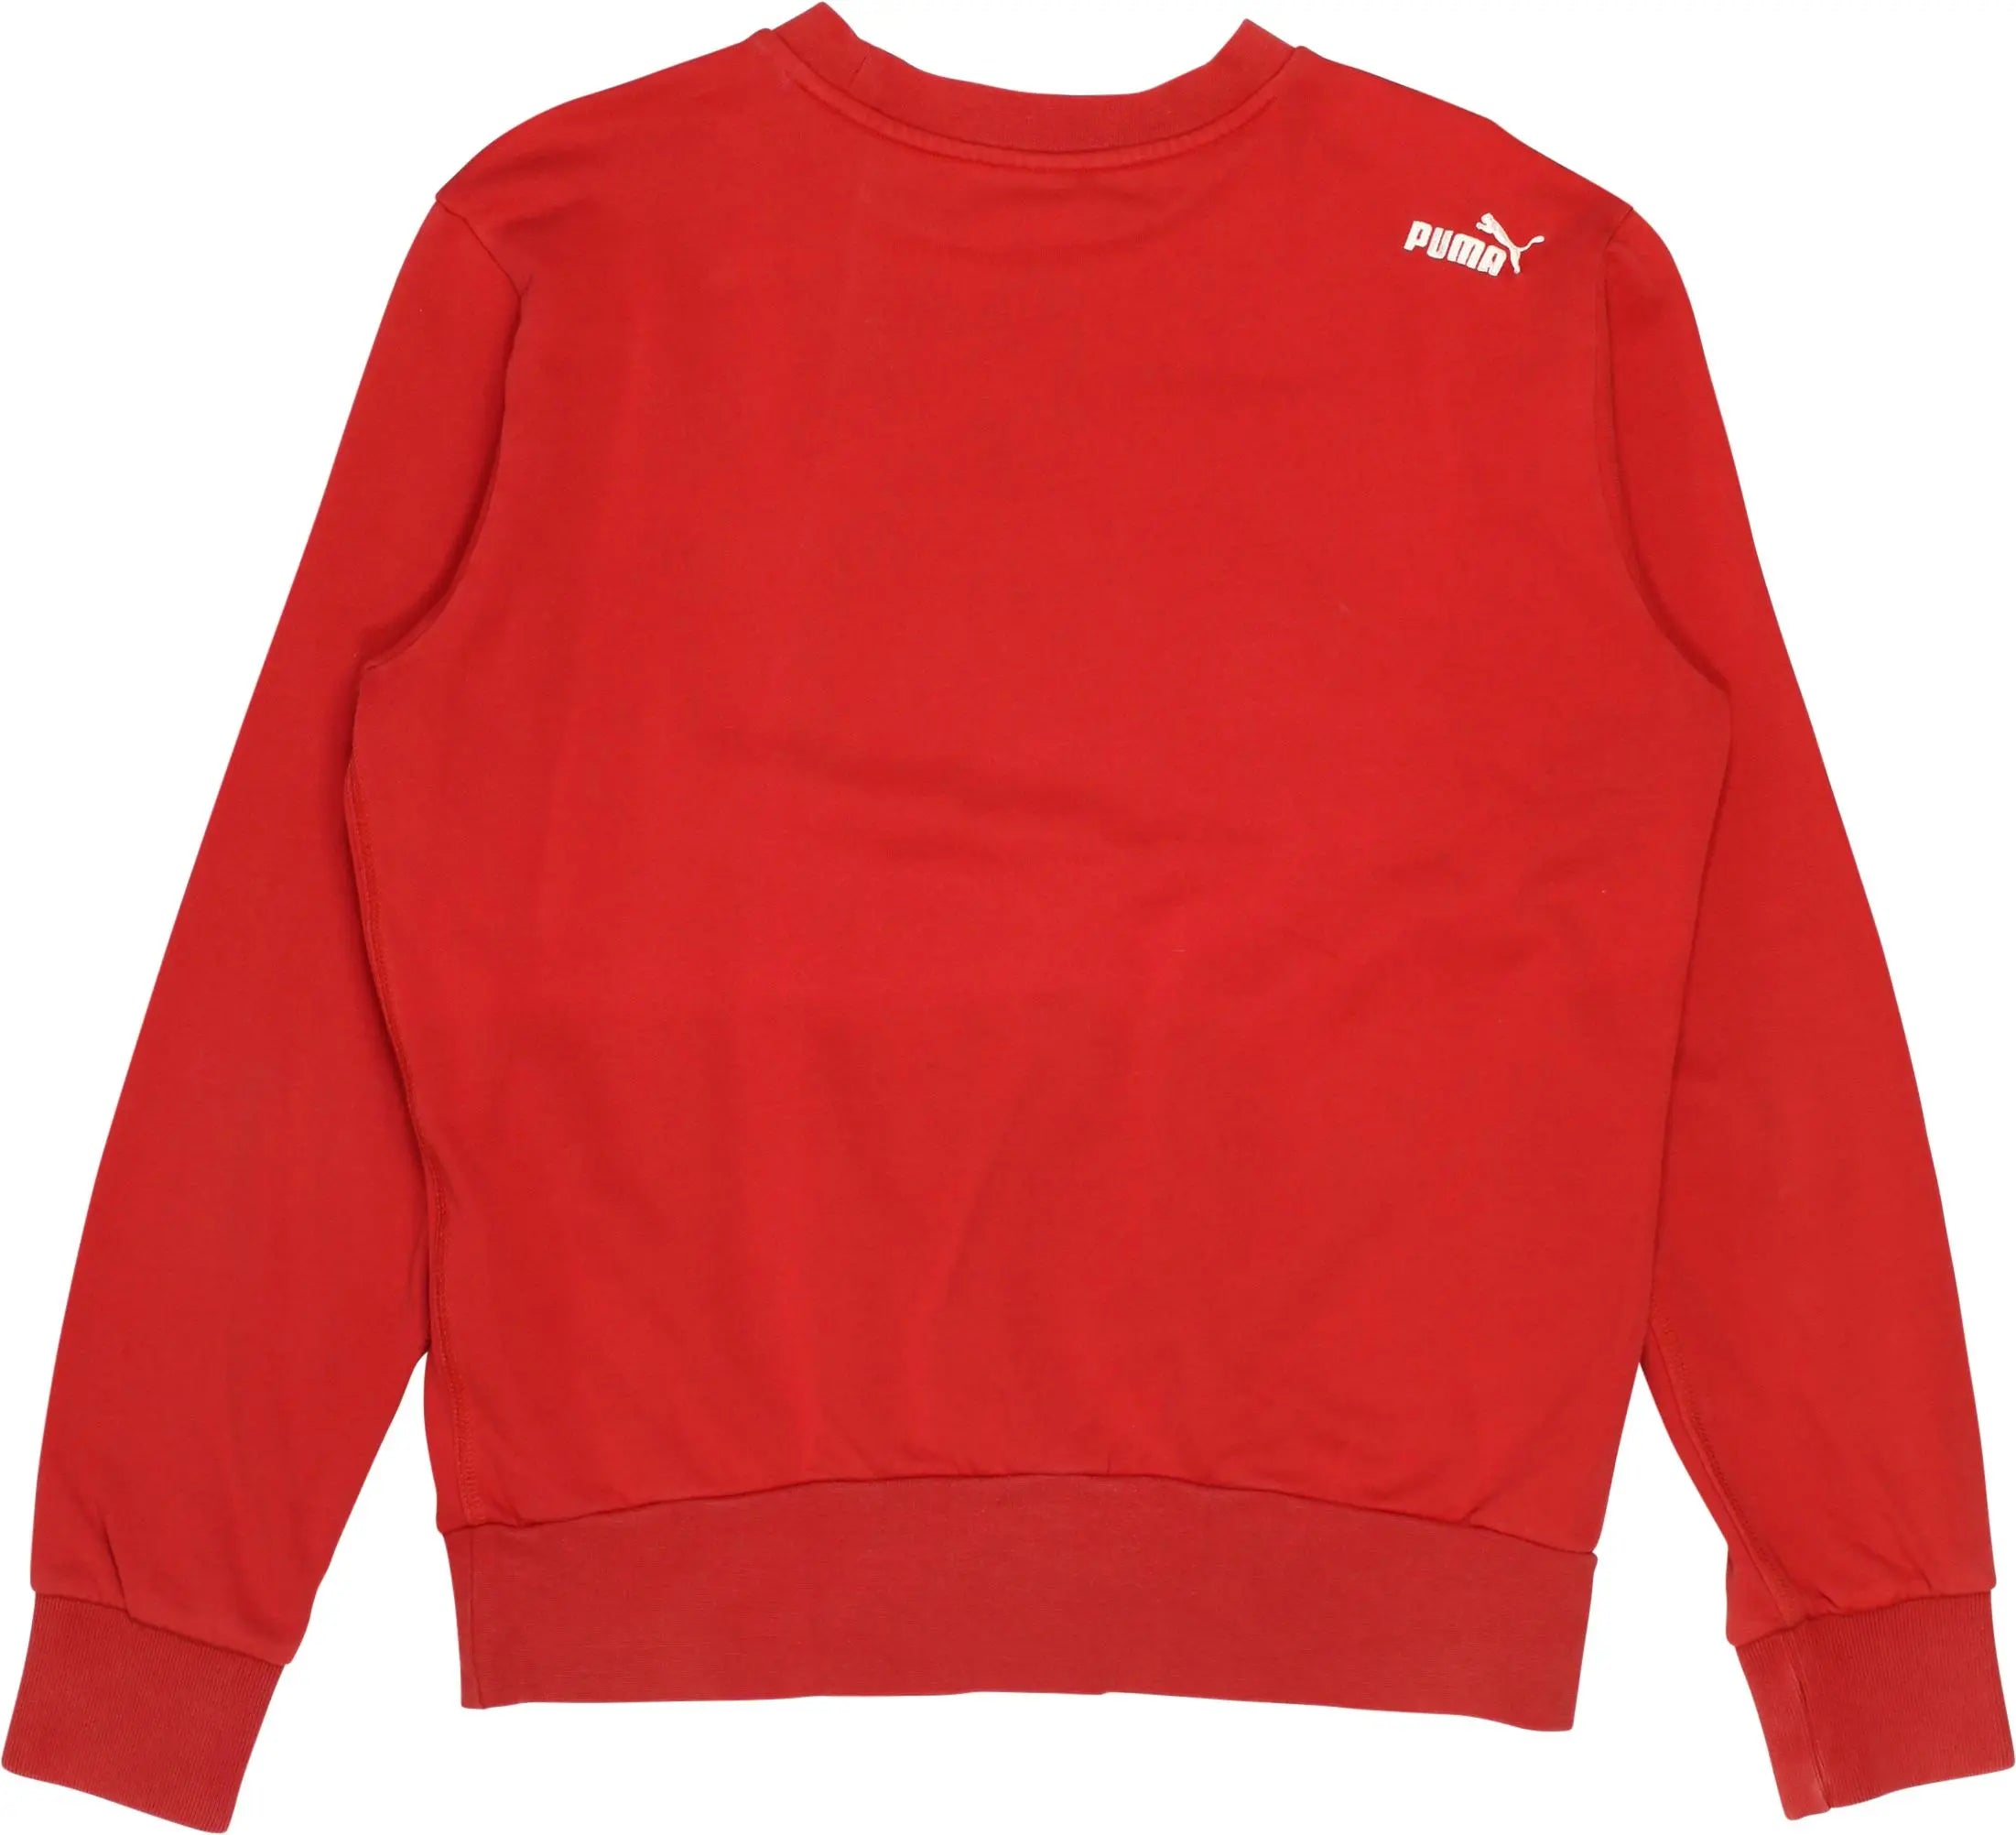 Puma - Red Sweatshirt by Puma- ThriftTale.com - Vintage and second handclothing